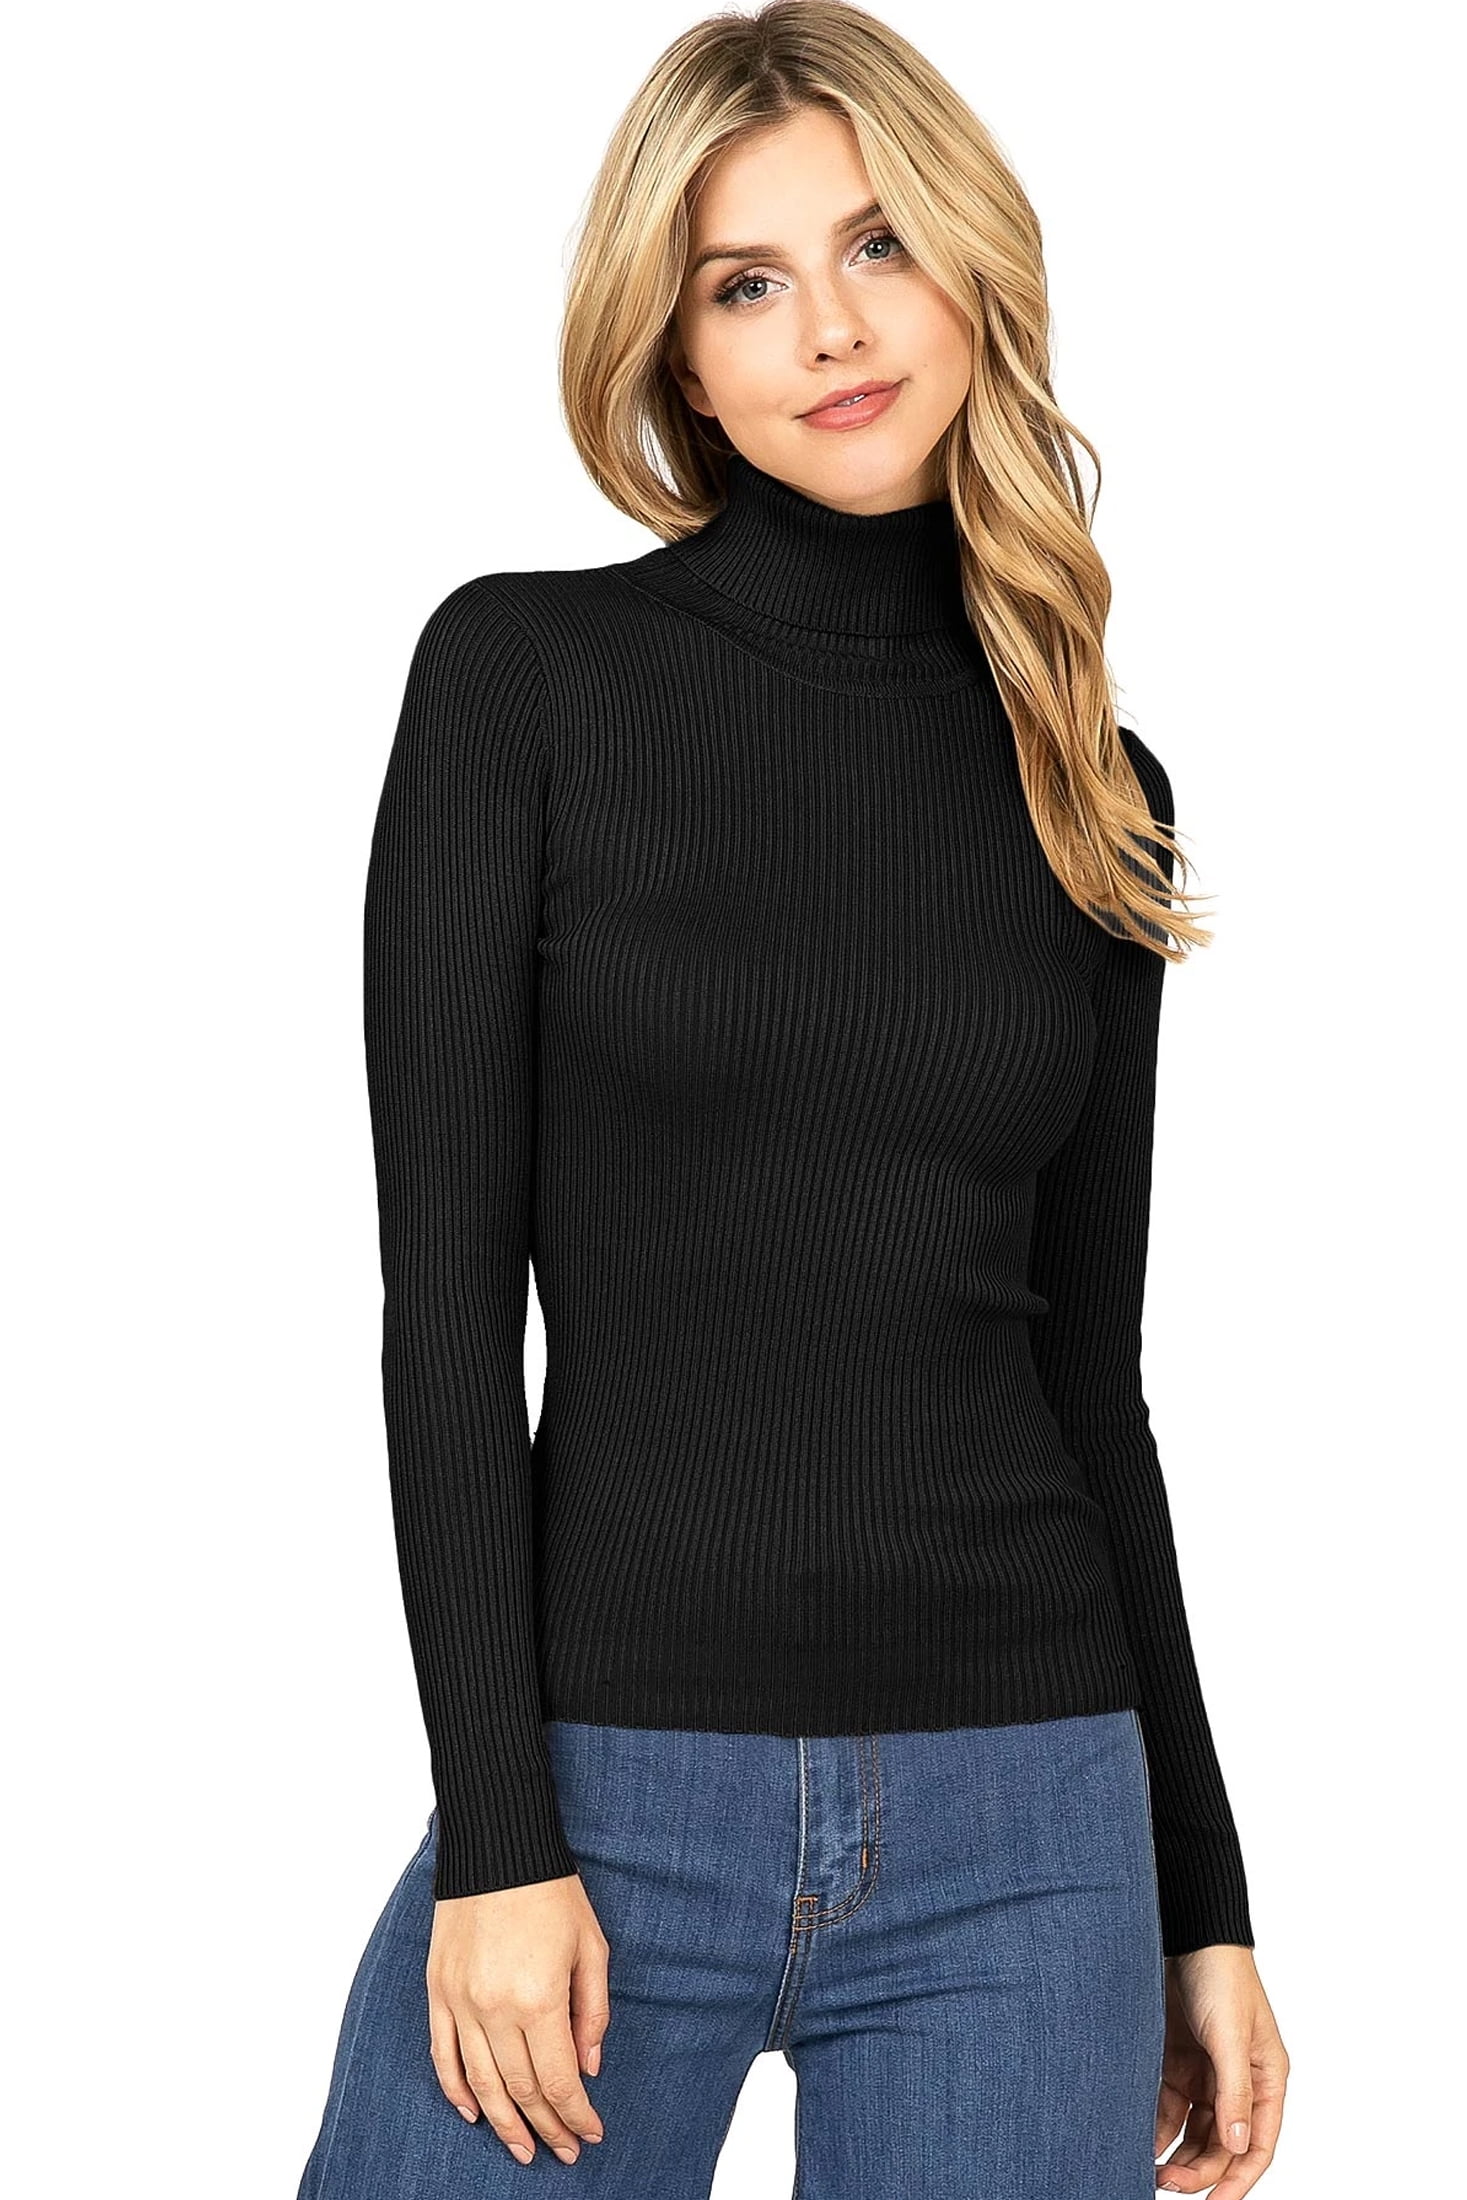 Ambiance Apparel Women S Stretchy Ribbed Long Sleeve Turtle Neck Top L Black